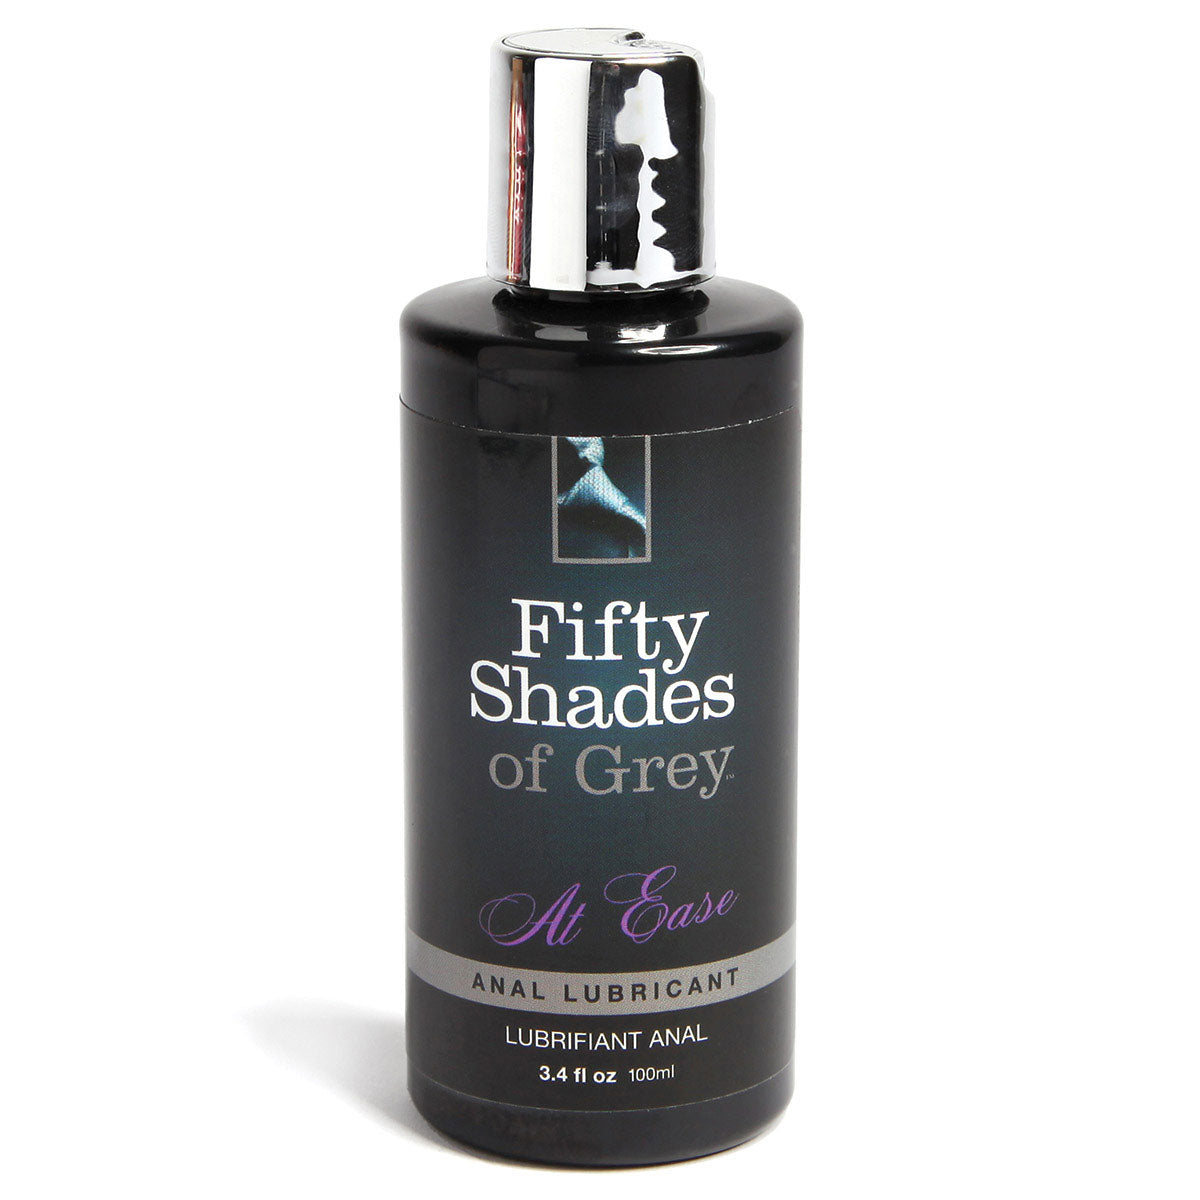 Fifty Shades At Ease Anal Lubricant 3.4oz